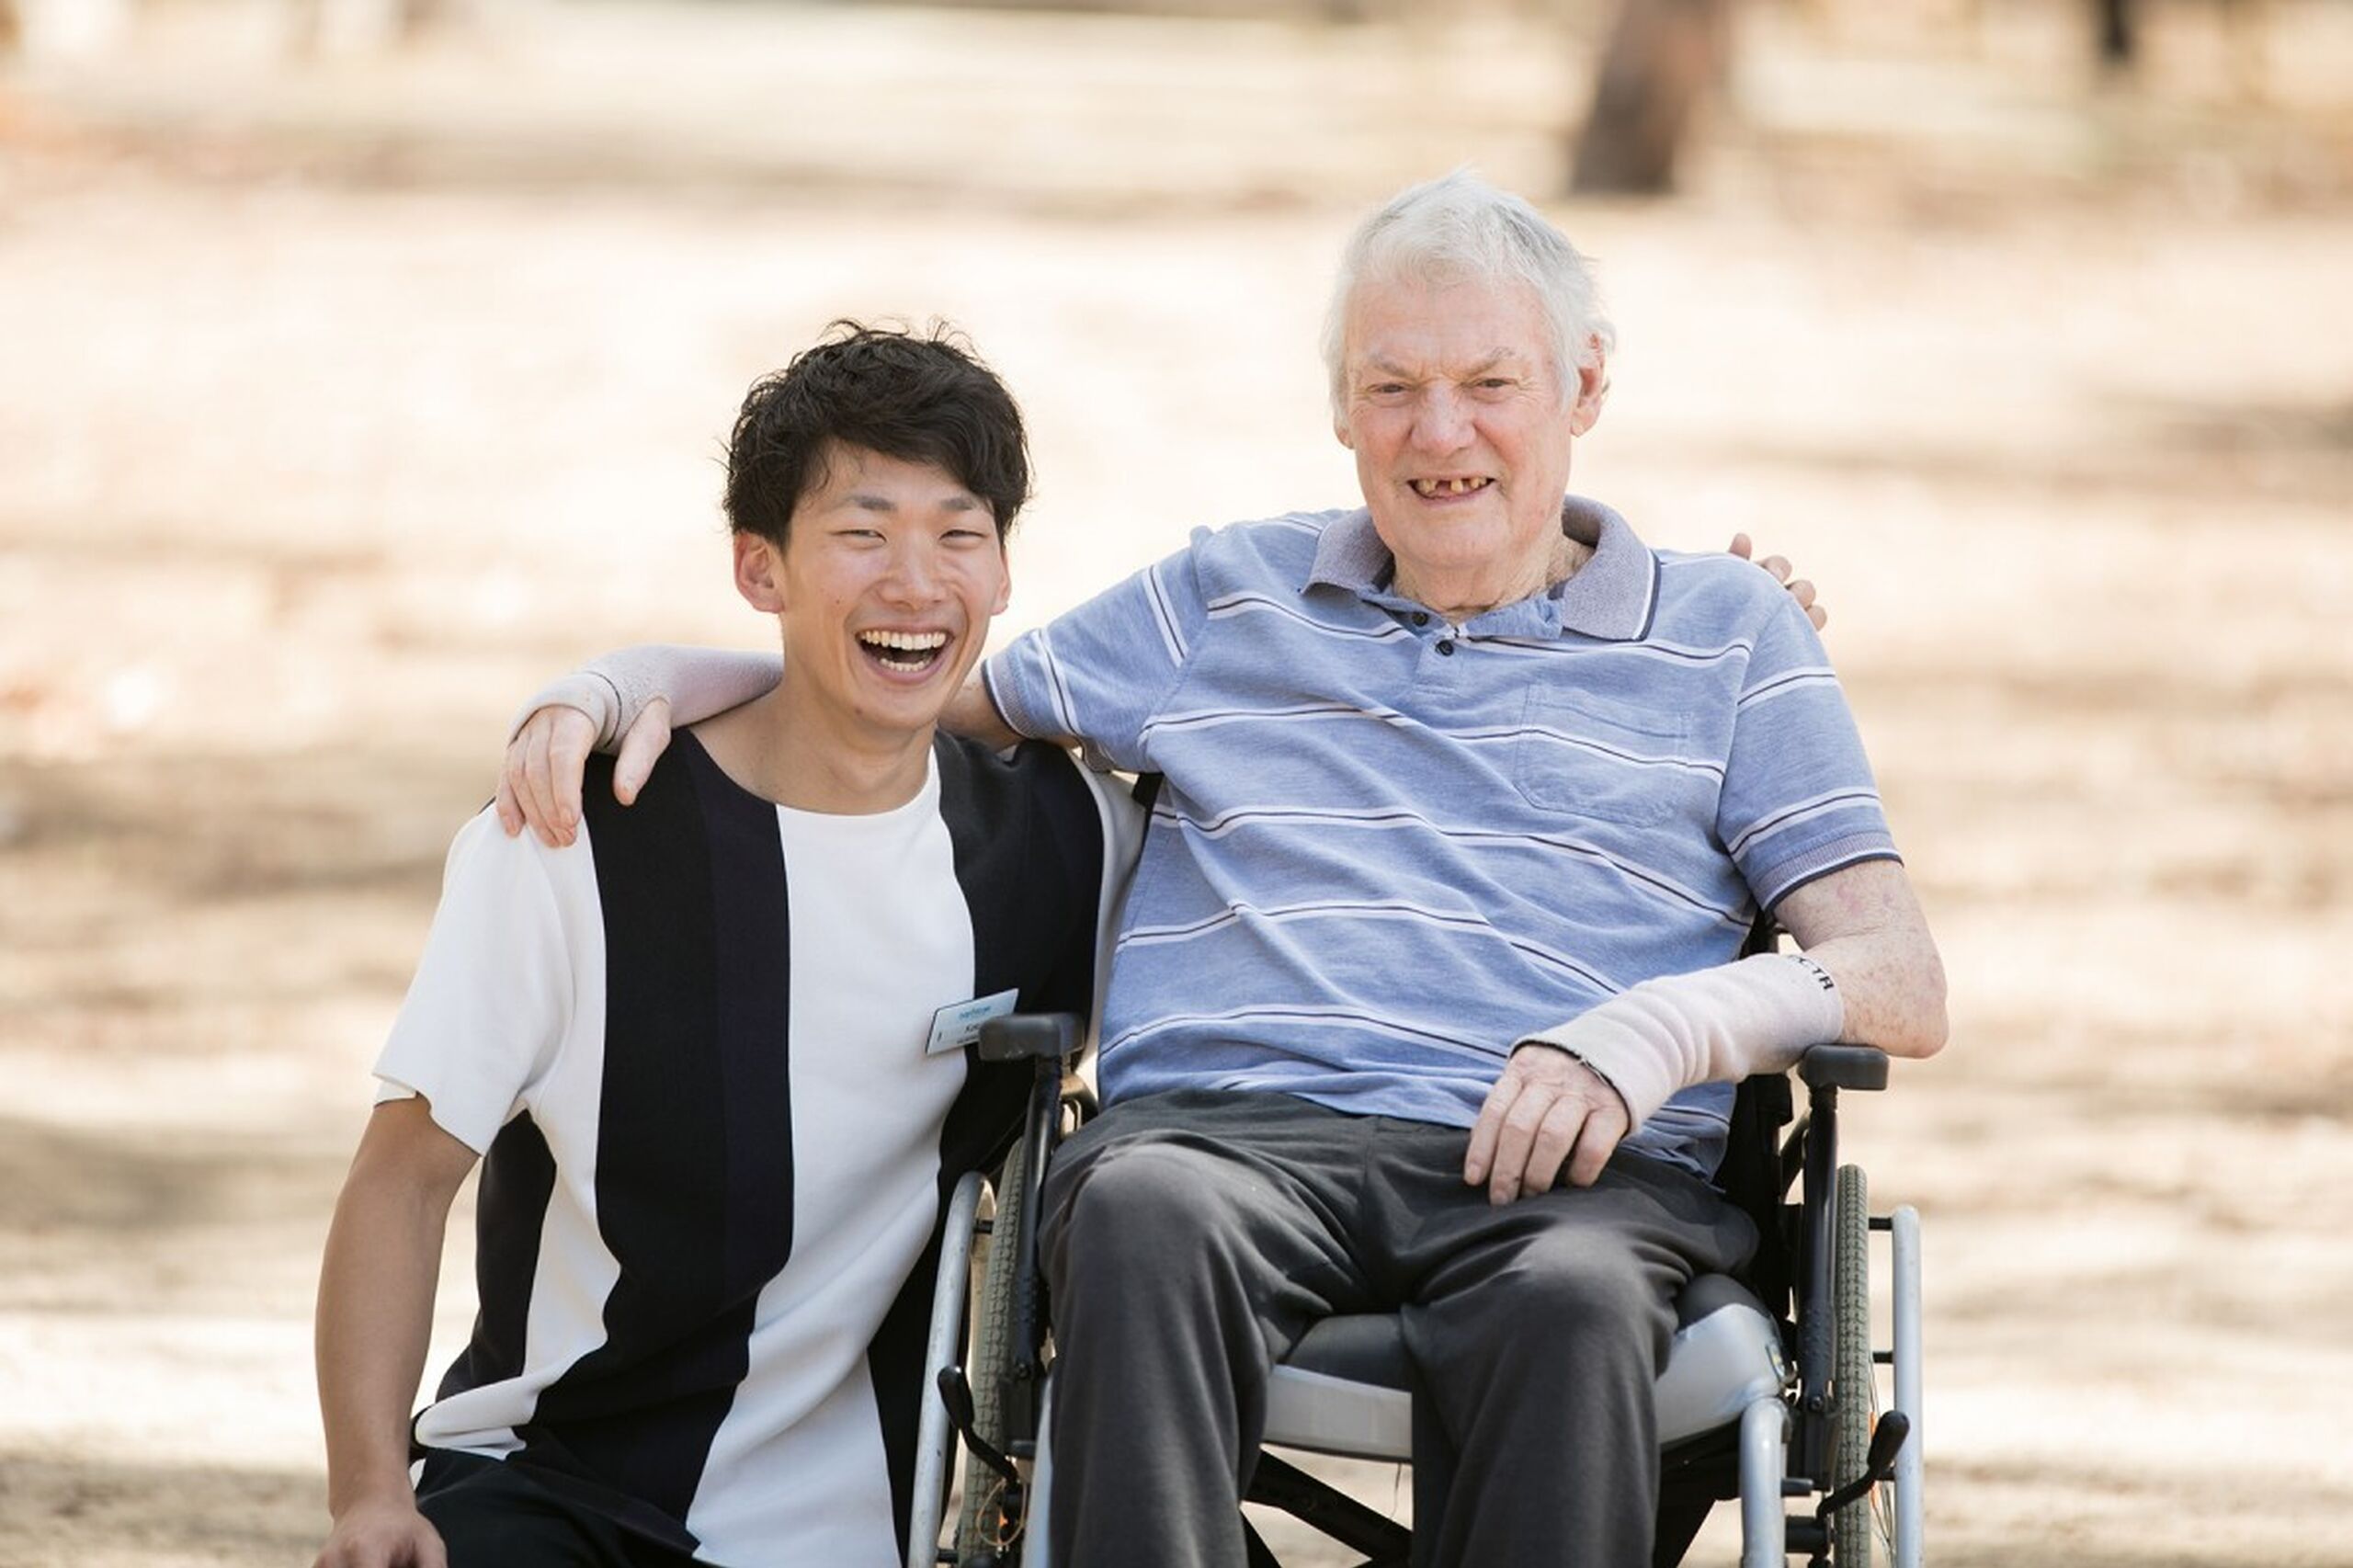 From Japan to volunteer with Baptistcare at the Wheatbelt